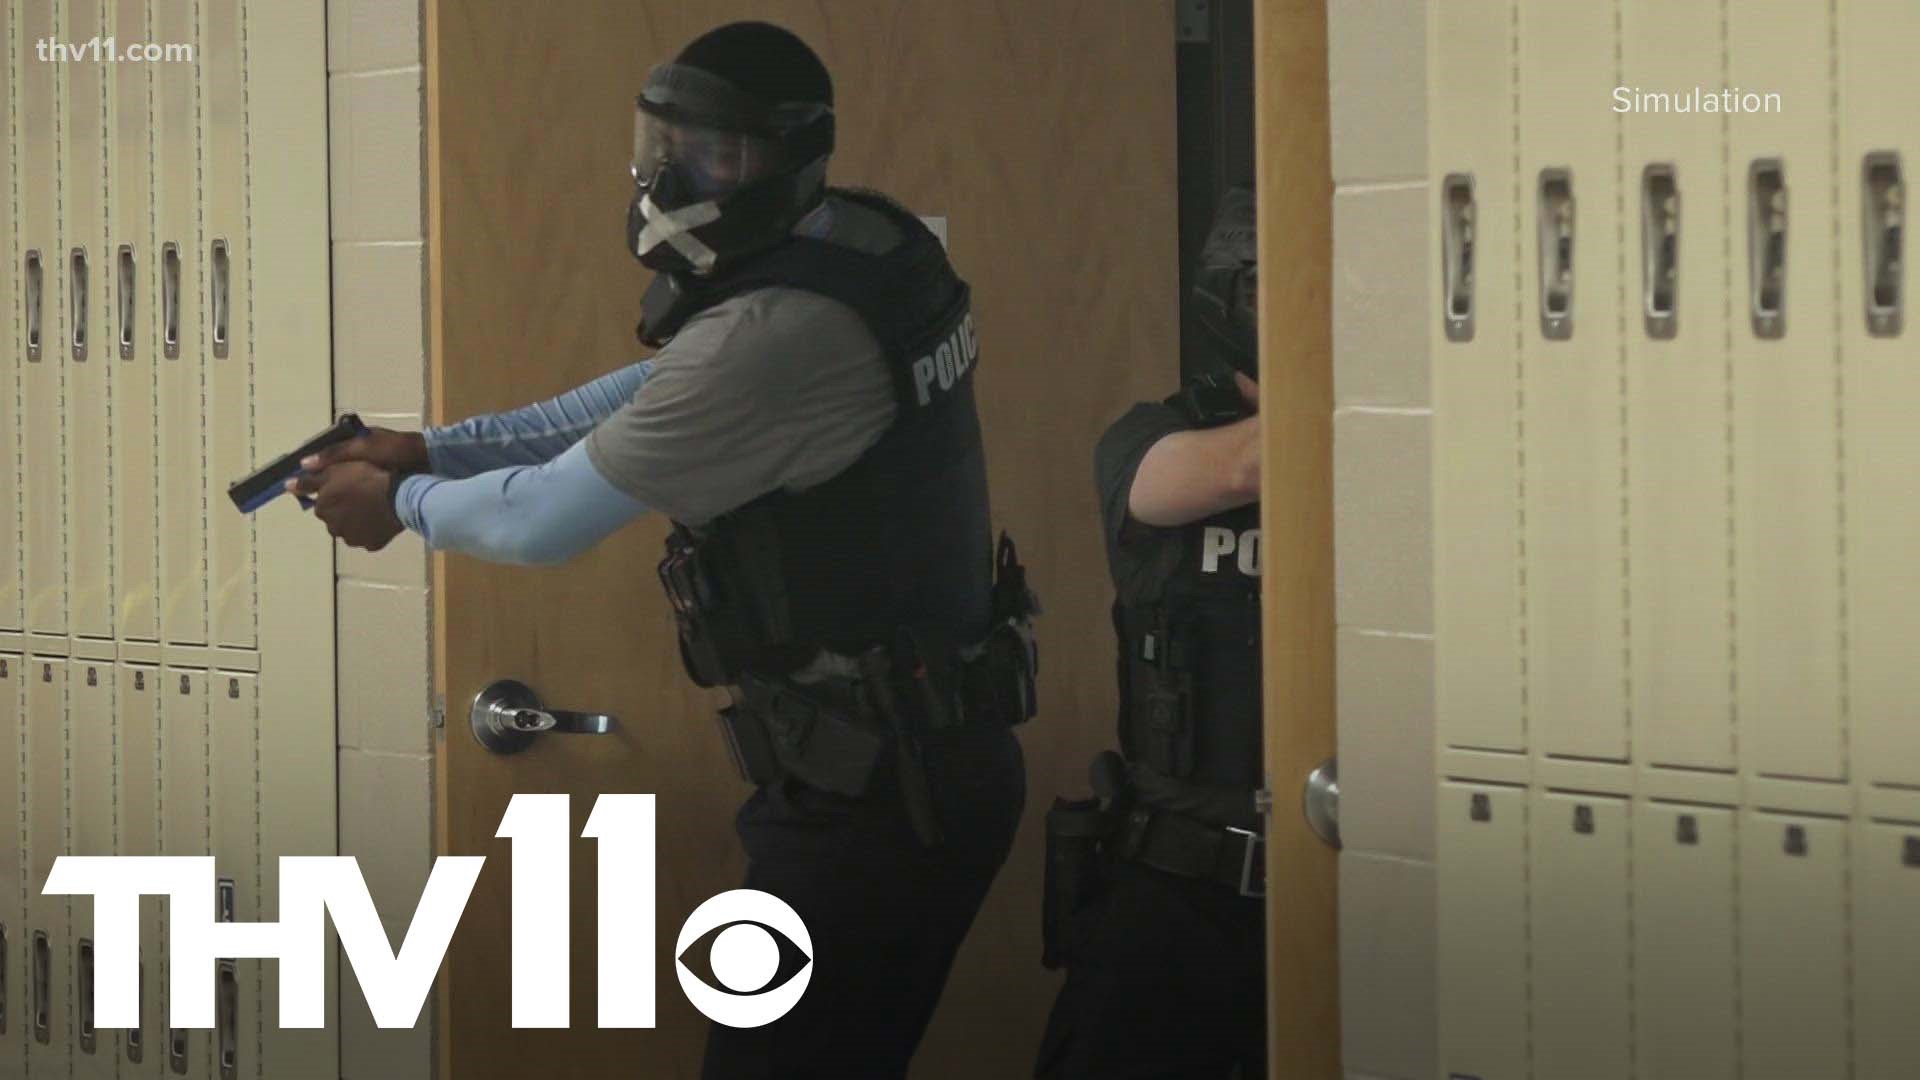 First responders are preparing themselves with hands-on training to respond to active shooters, bombs, and medical emergencies.